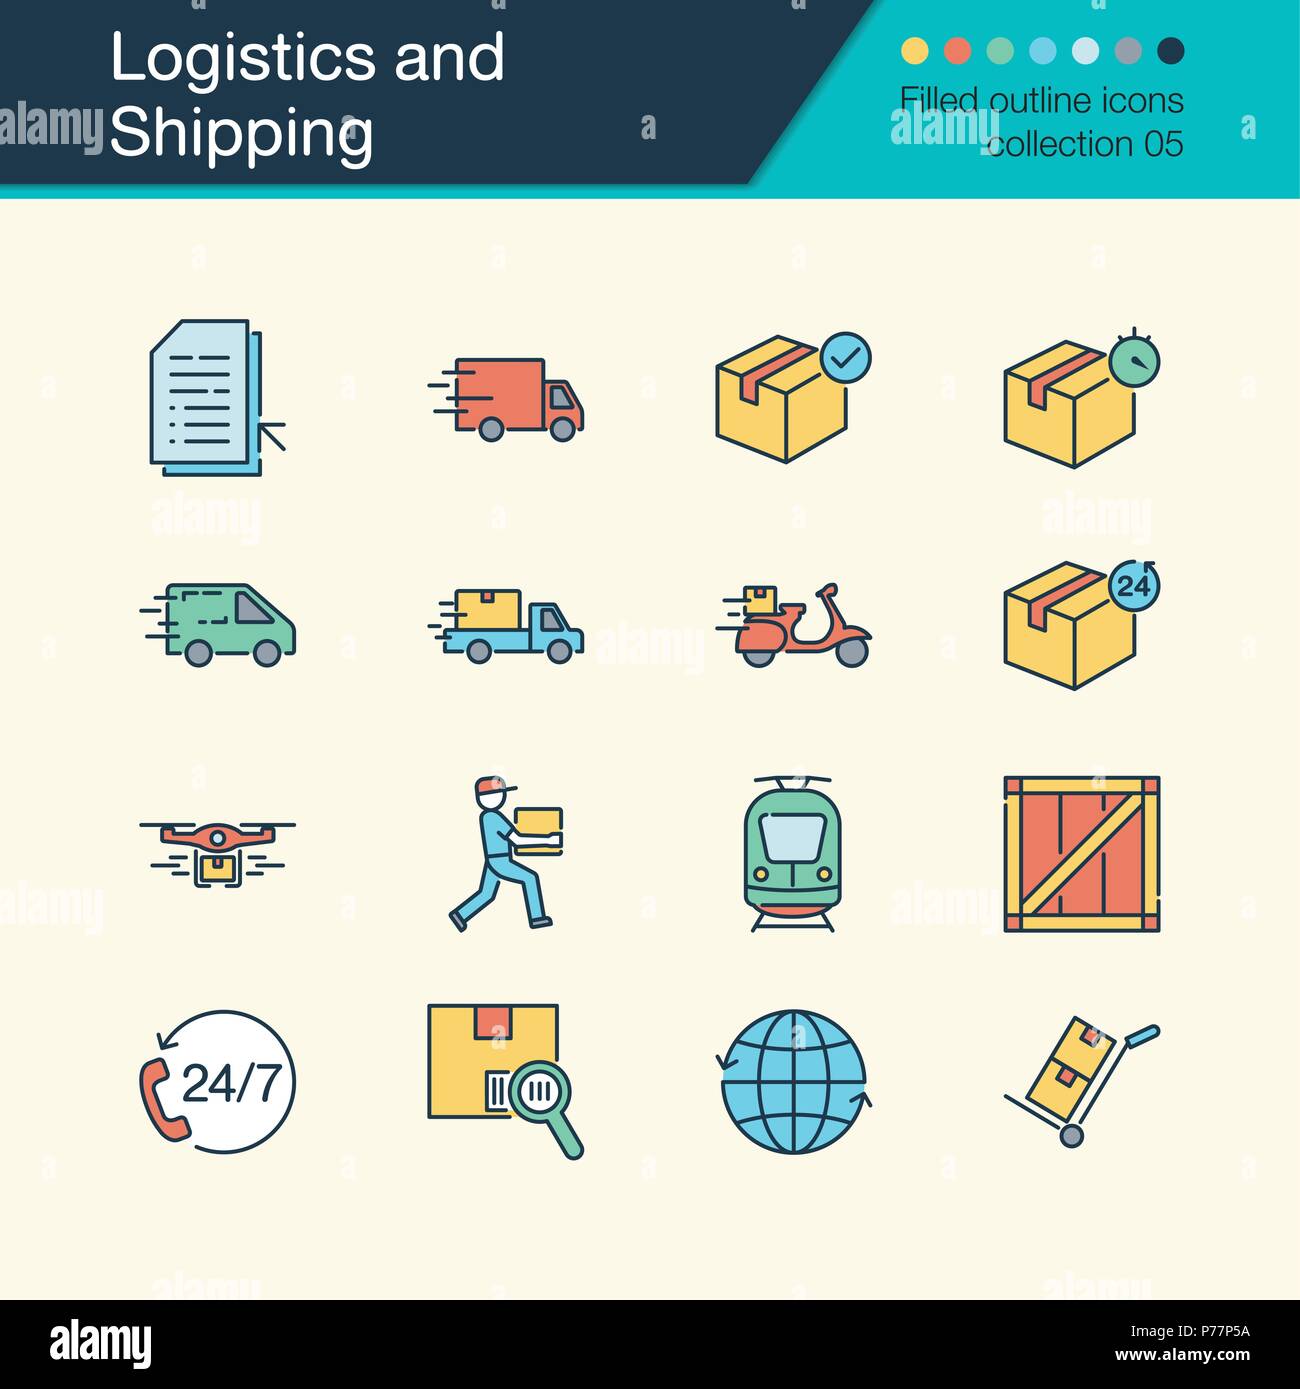 Logistics and Shipping icons. Filled outline design collection 5. For presentation, graphic design, mobile application, web design, infographics. Vect Stock Vector